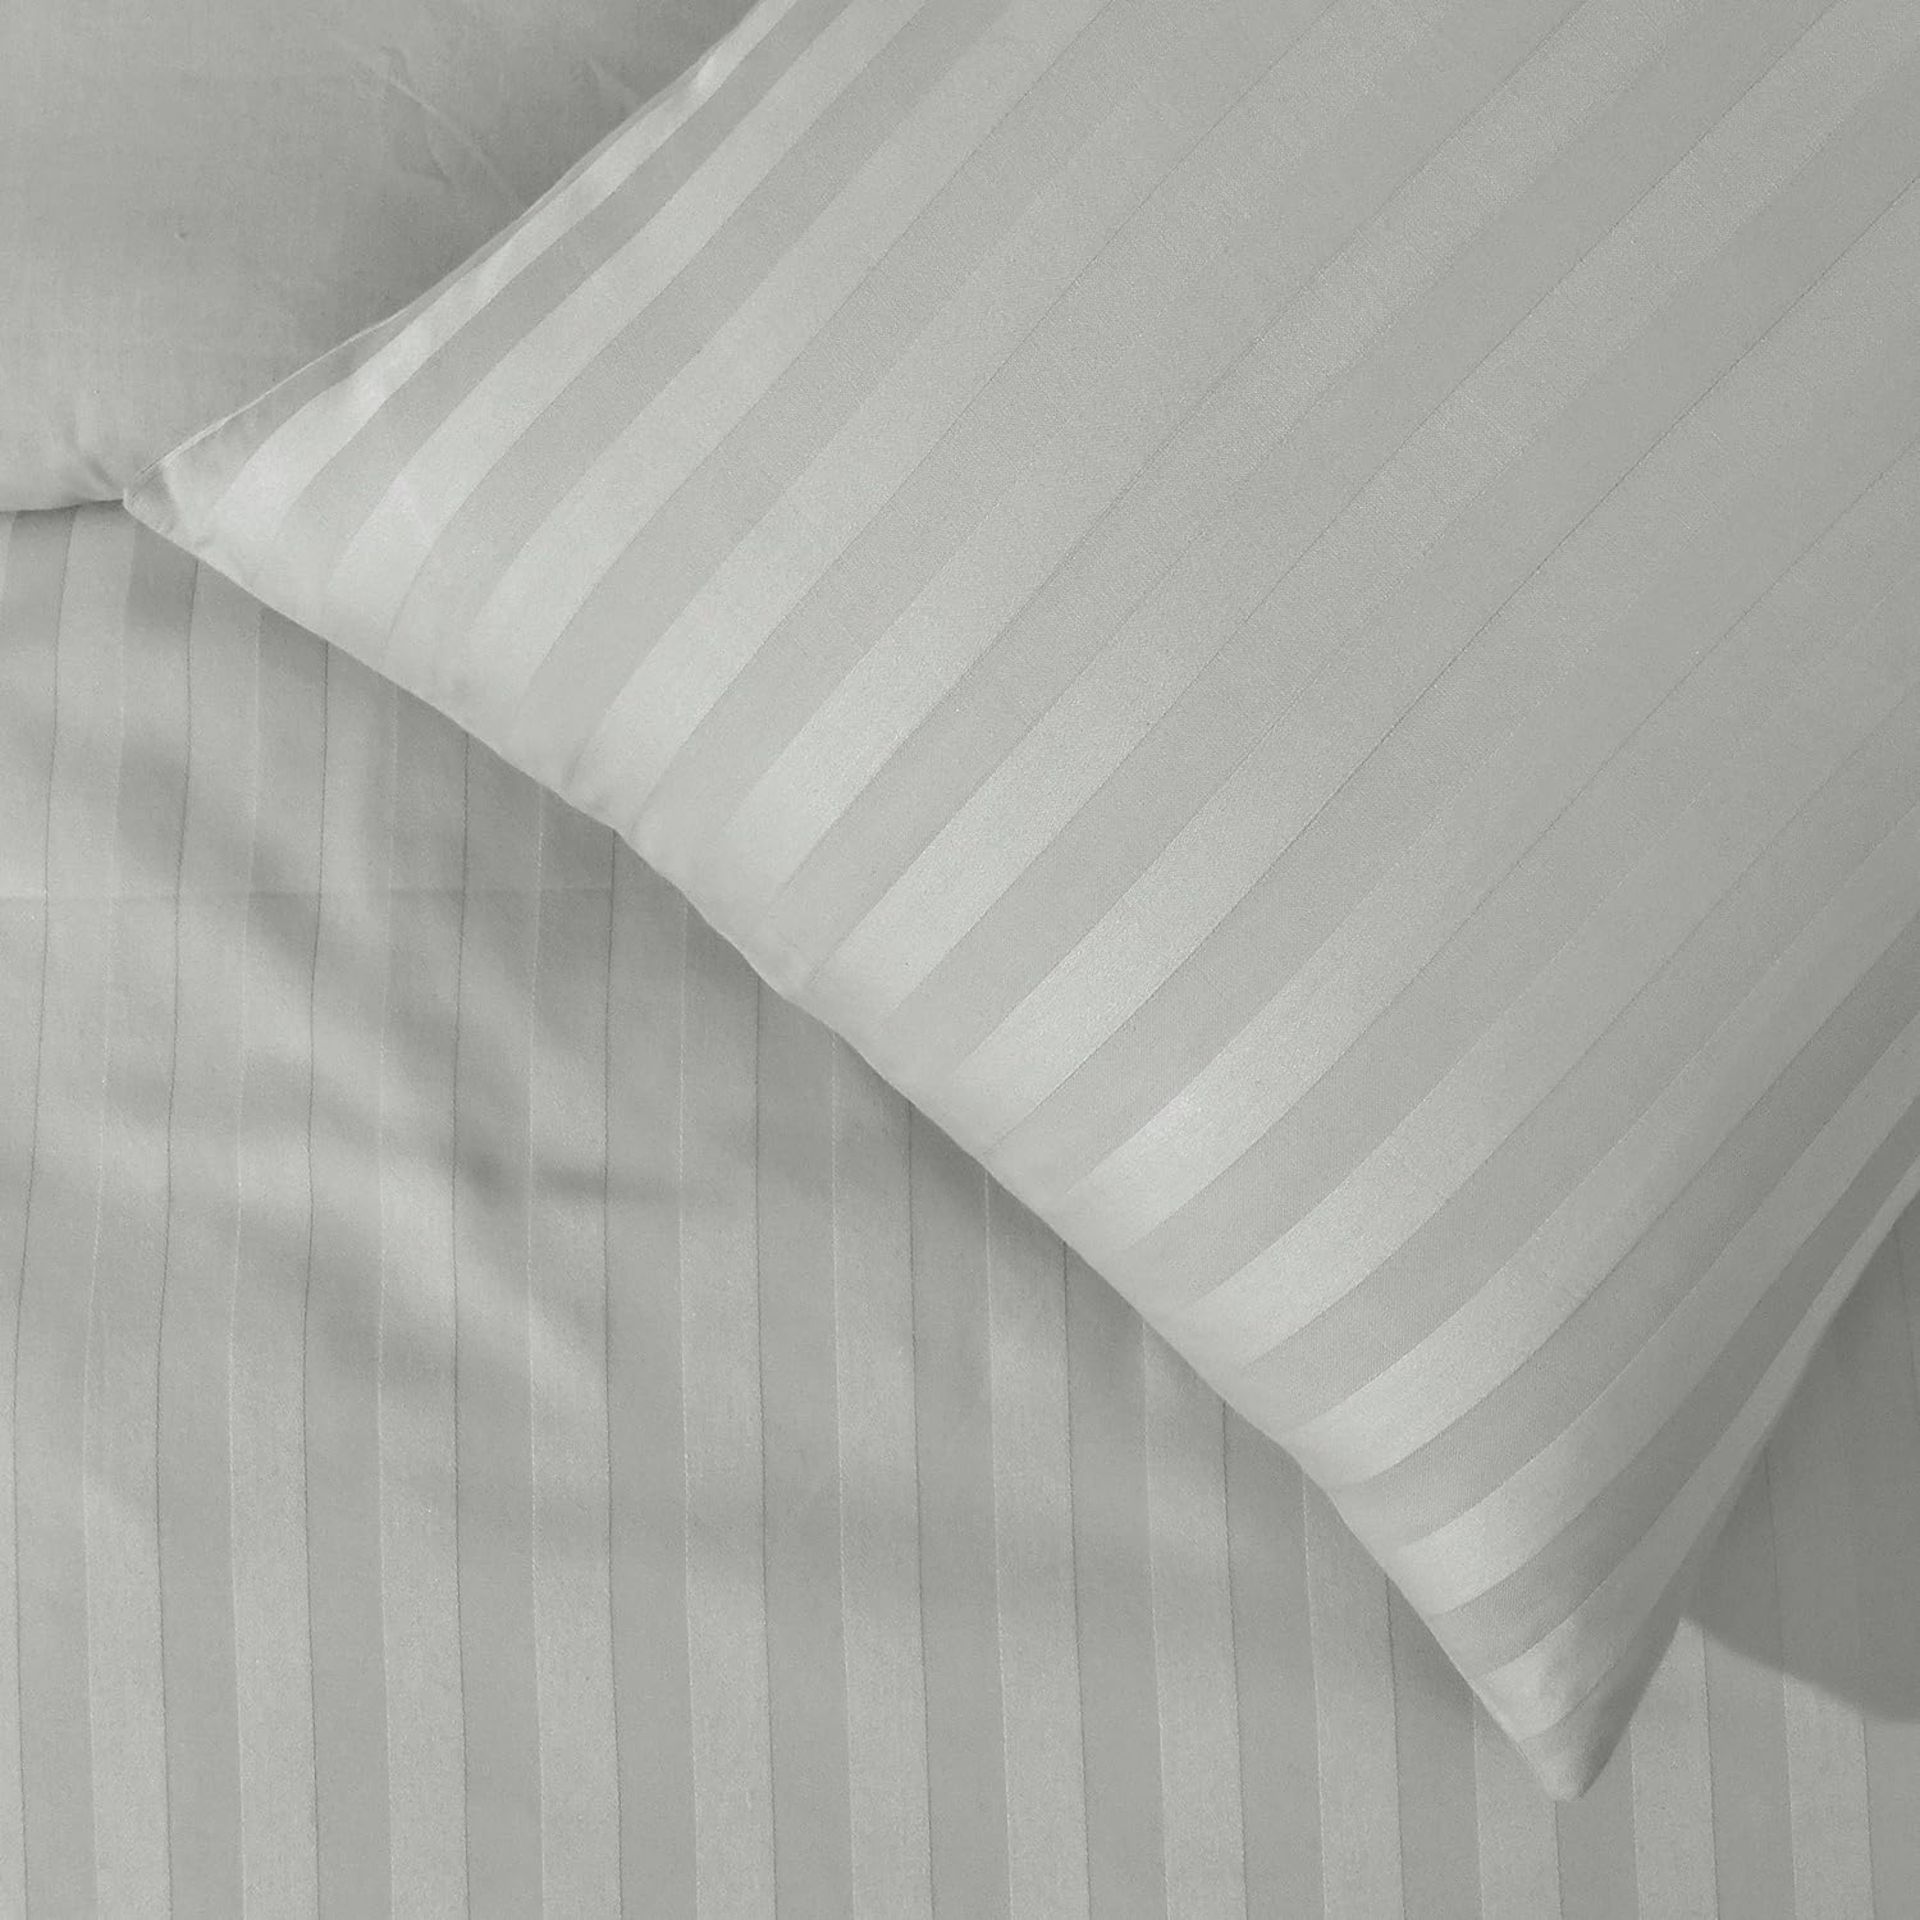 6x NEW & PACKAGED SLEEPDOWN Hotel Collection 225 Thread Count Satin Stripe KING SIZE Duvet Set - - Image 2 of 3